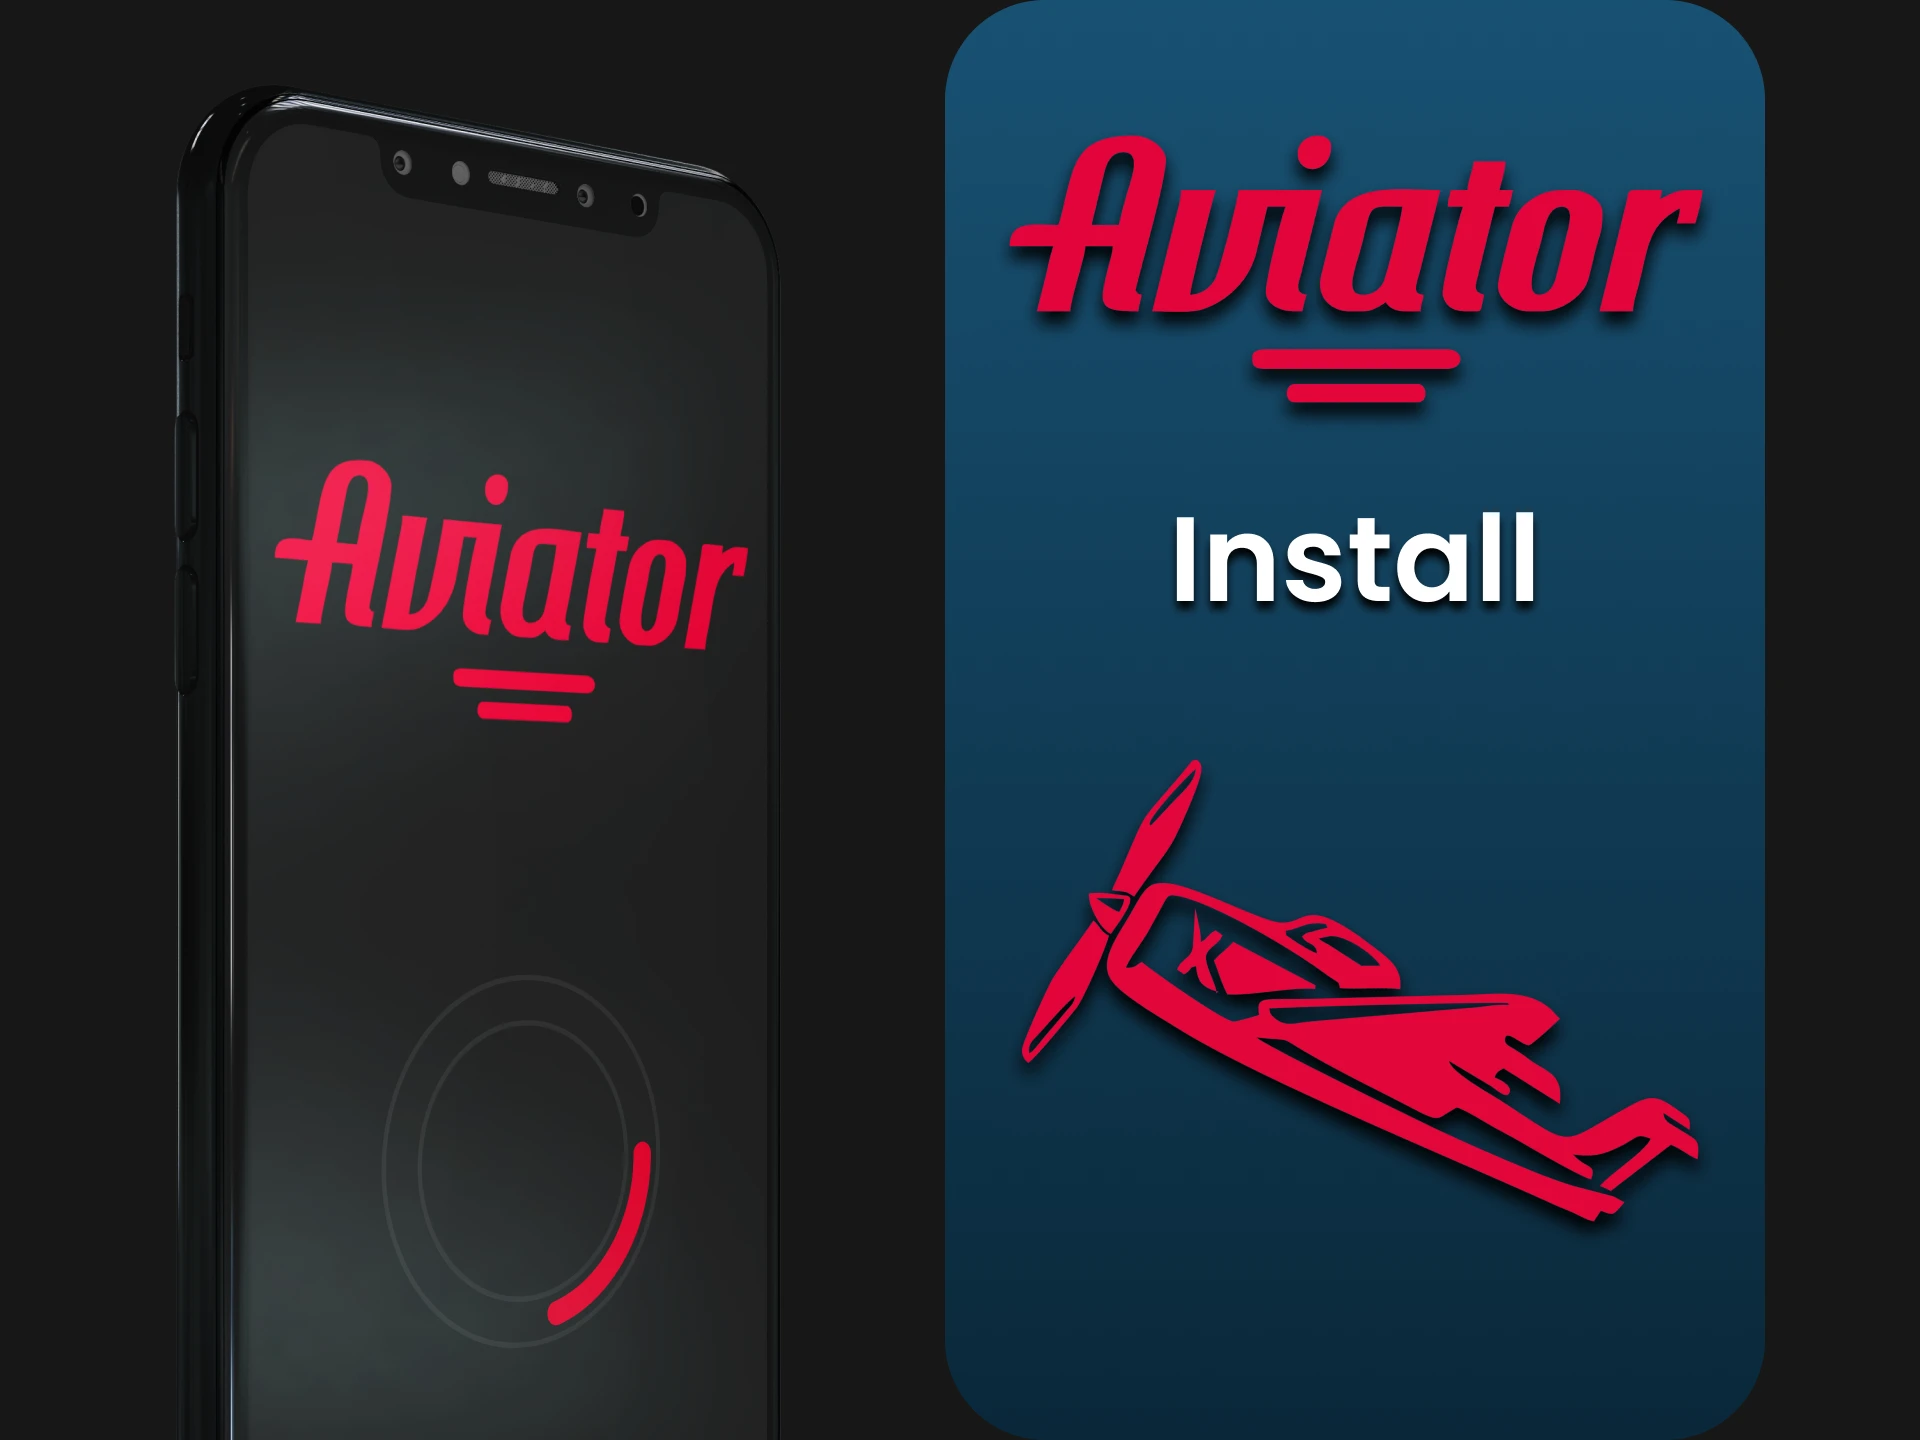 We will show you how to install the Aviator application.